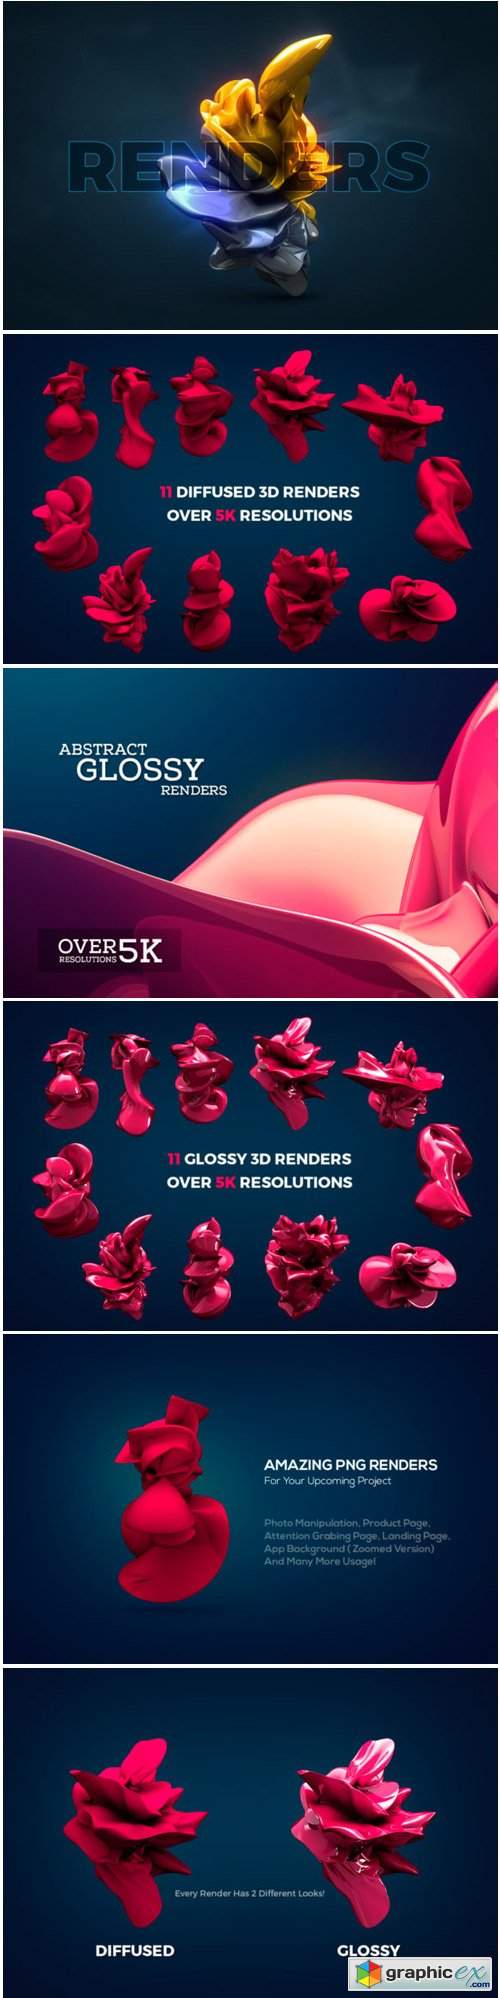 Abstract Glossy 3D Renders